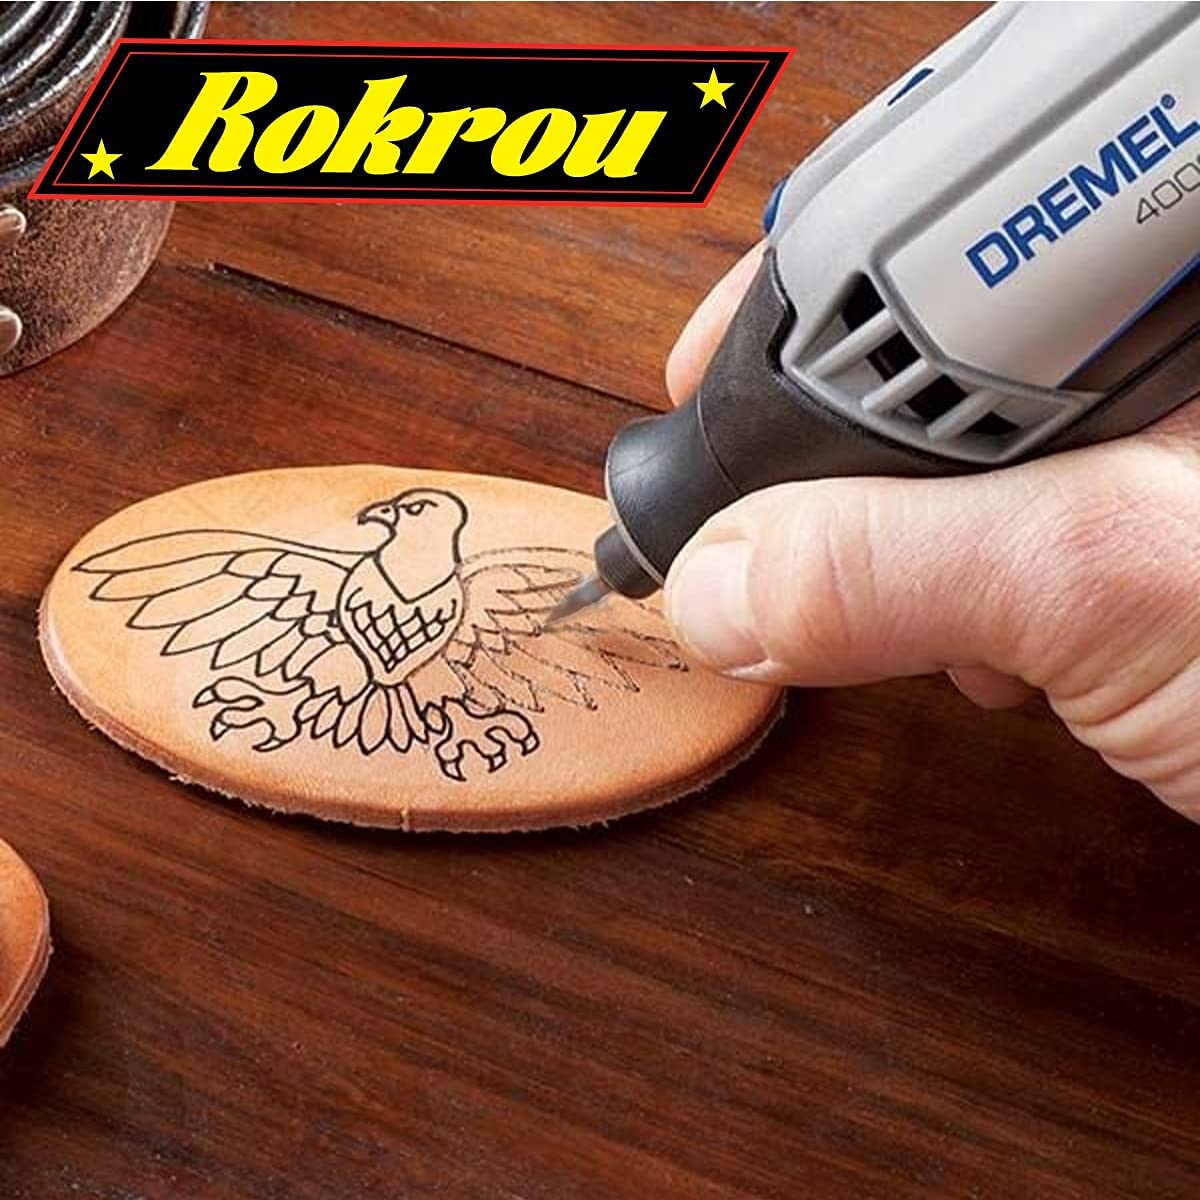 Rokrou Carbide Double Cut for Dremel carving bits, rotary tool, 20 Pcs  Rotary Burr Set with 1/8” Shank and 1/4 Head Length for, Woodworking,  Engraving, Metal Carving, Drilling, Polishing